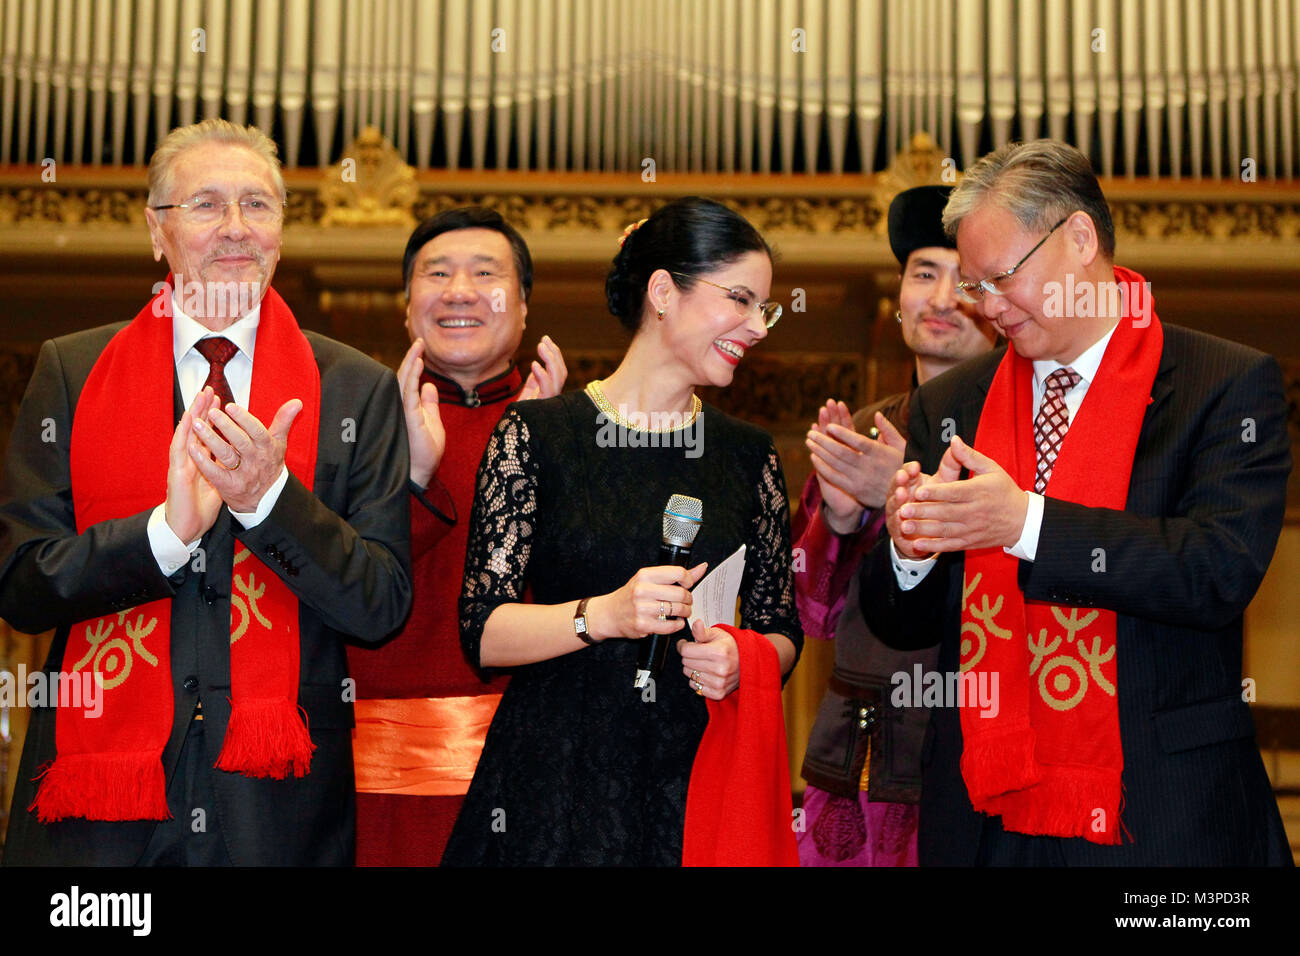 Bucharest, Romania. 10th Feb, 2018. Romanian former President Emil Constantinescu (1st L), Romanian Vice Prime Minister Ana Birchall (C) and Chinese Ambassador to Romania Xu Feihong (1st R) attend an event celebrating the upcoming Chinese Lunar New Year at the Romanian Atheneum in Bucharest, capital of Romania, Feb. 10, 2018. Credit: Cristian Cristel/Xinhua/Alamy Live News Stock Photo